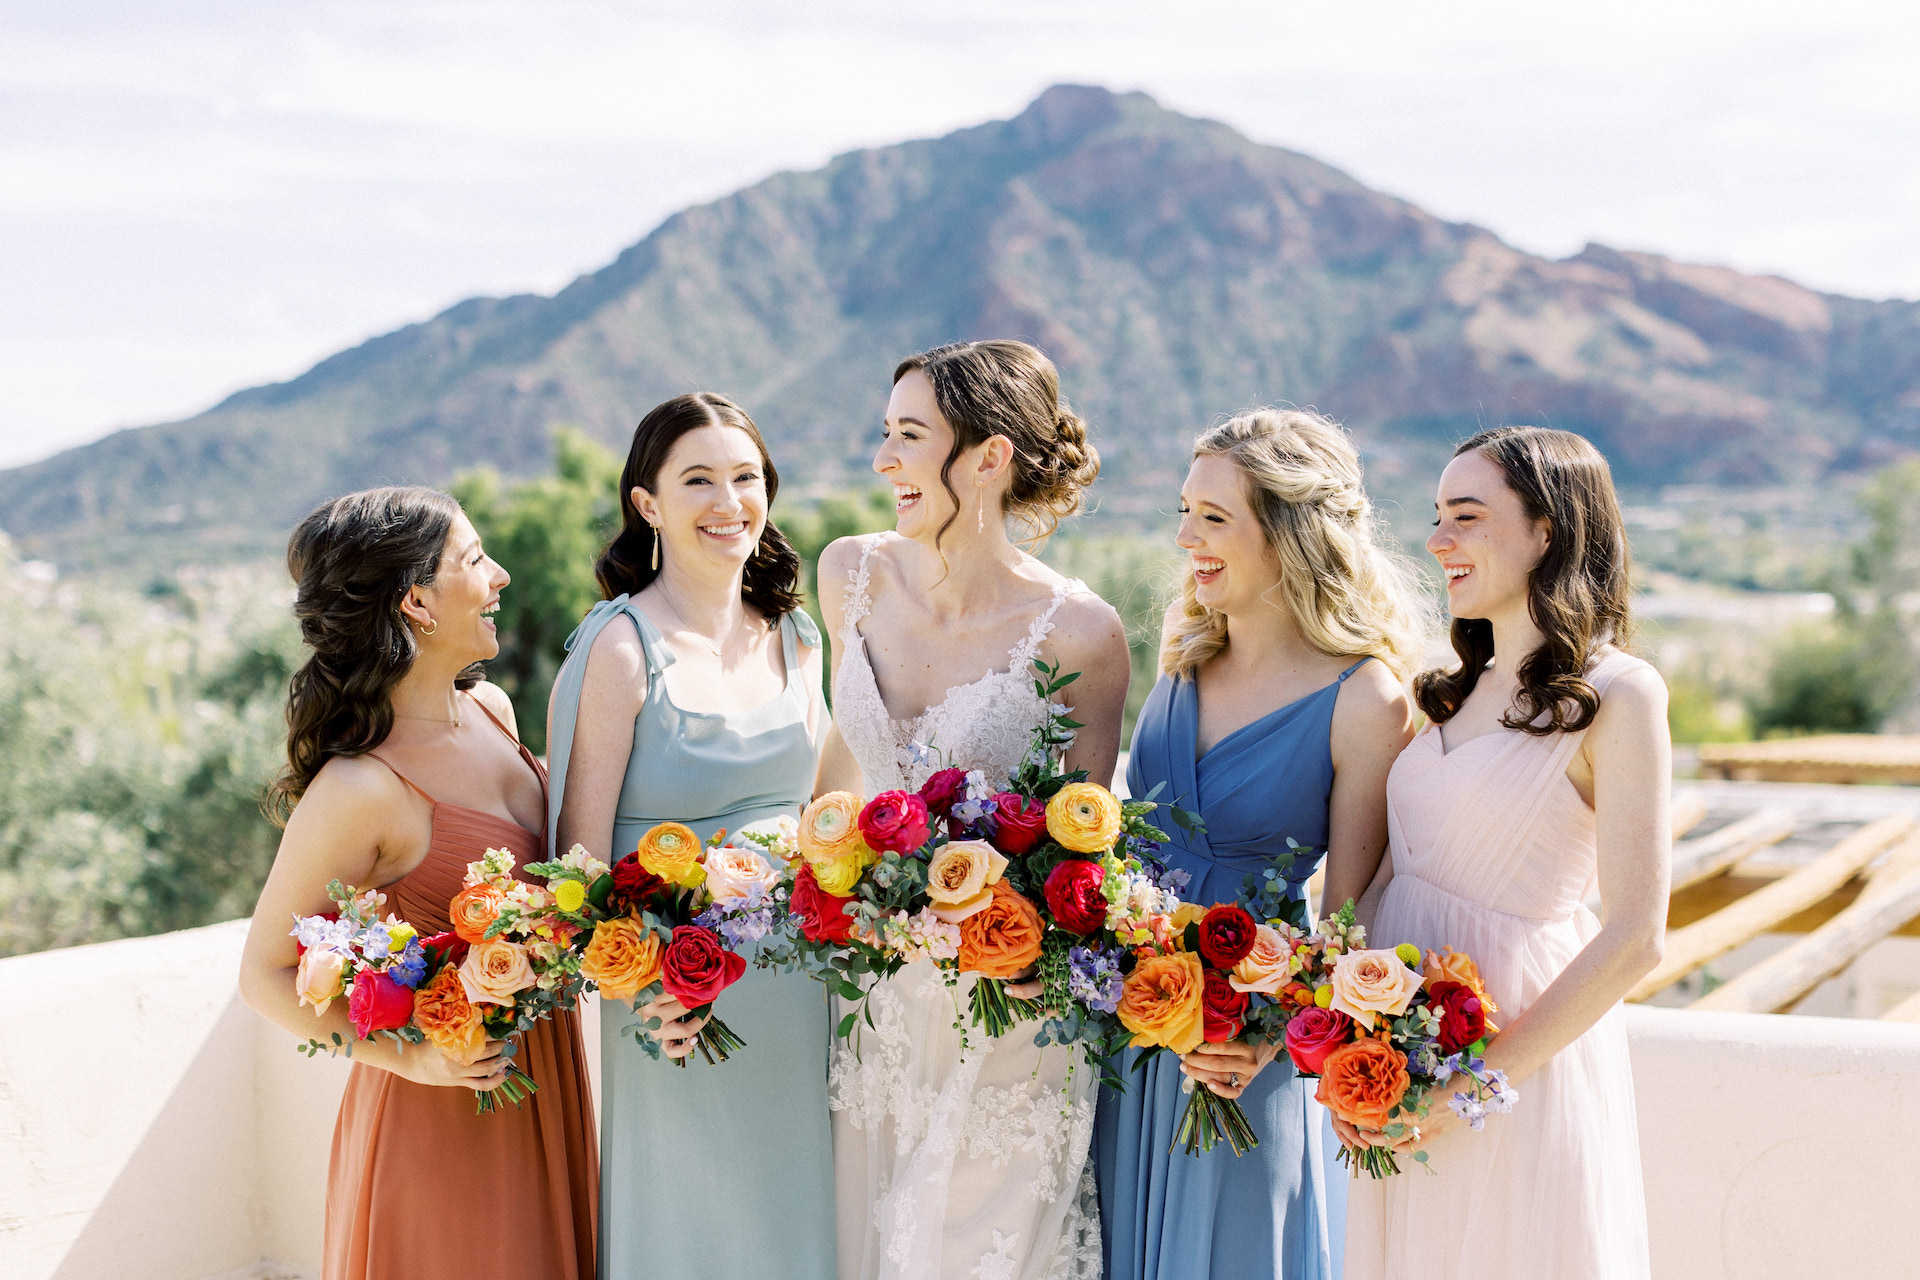 Bride standing outdoors with bridesmaids, all smiling and holding bouquets.